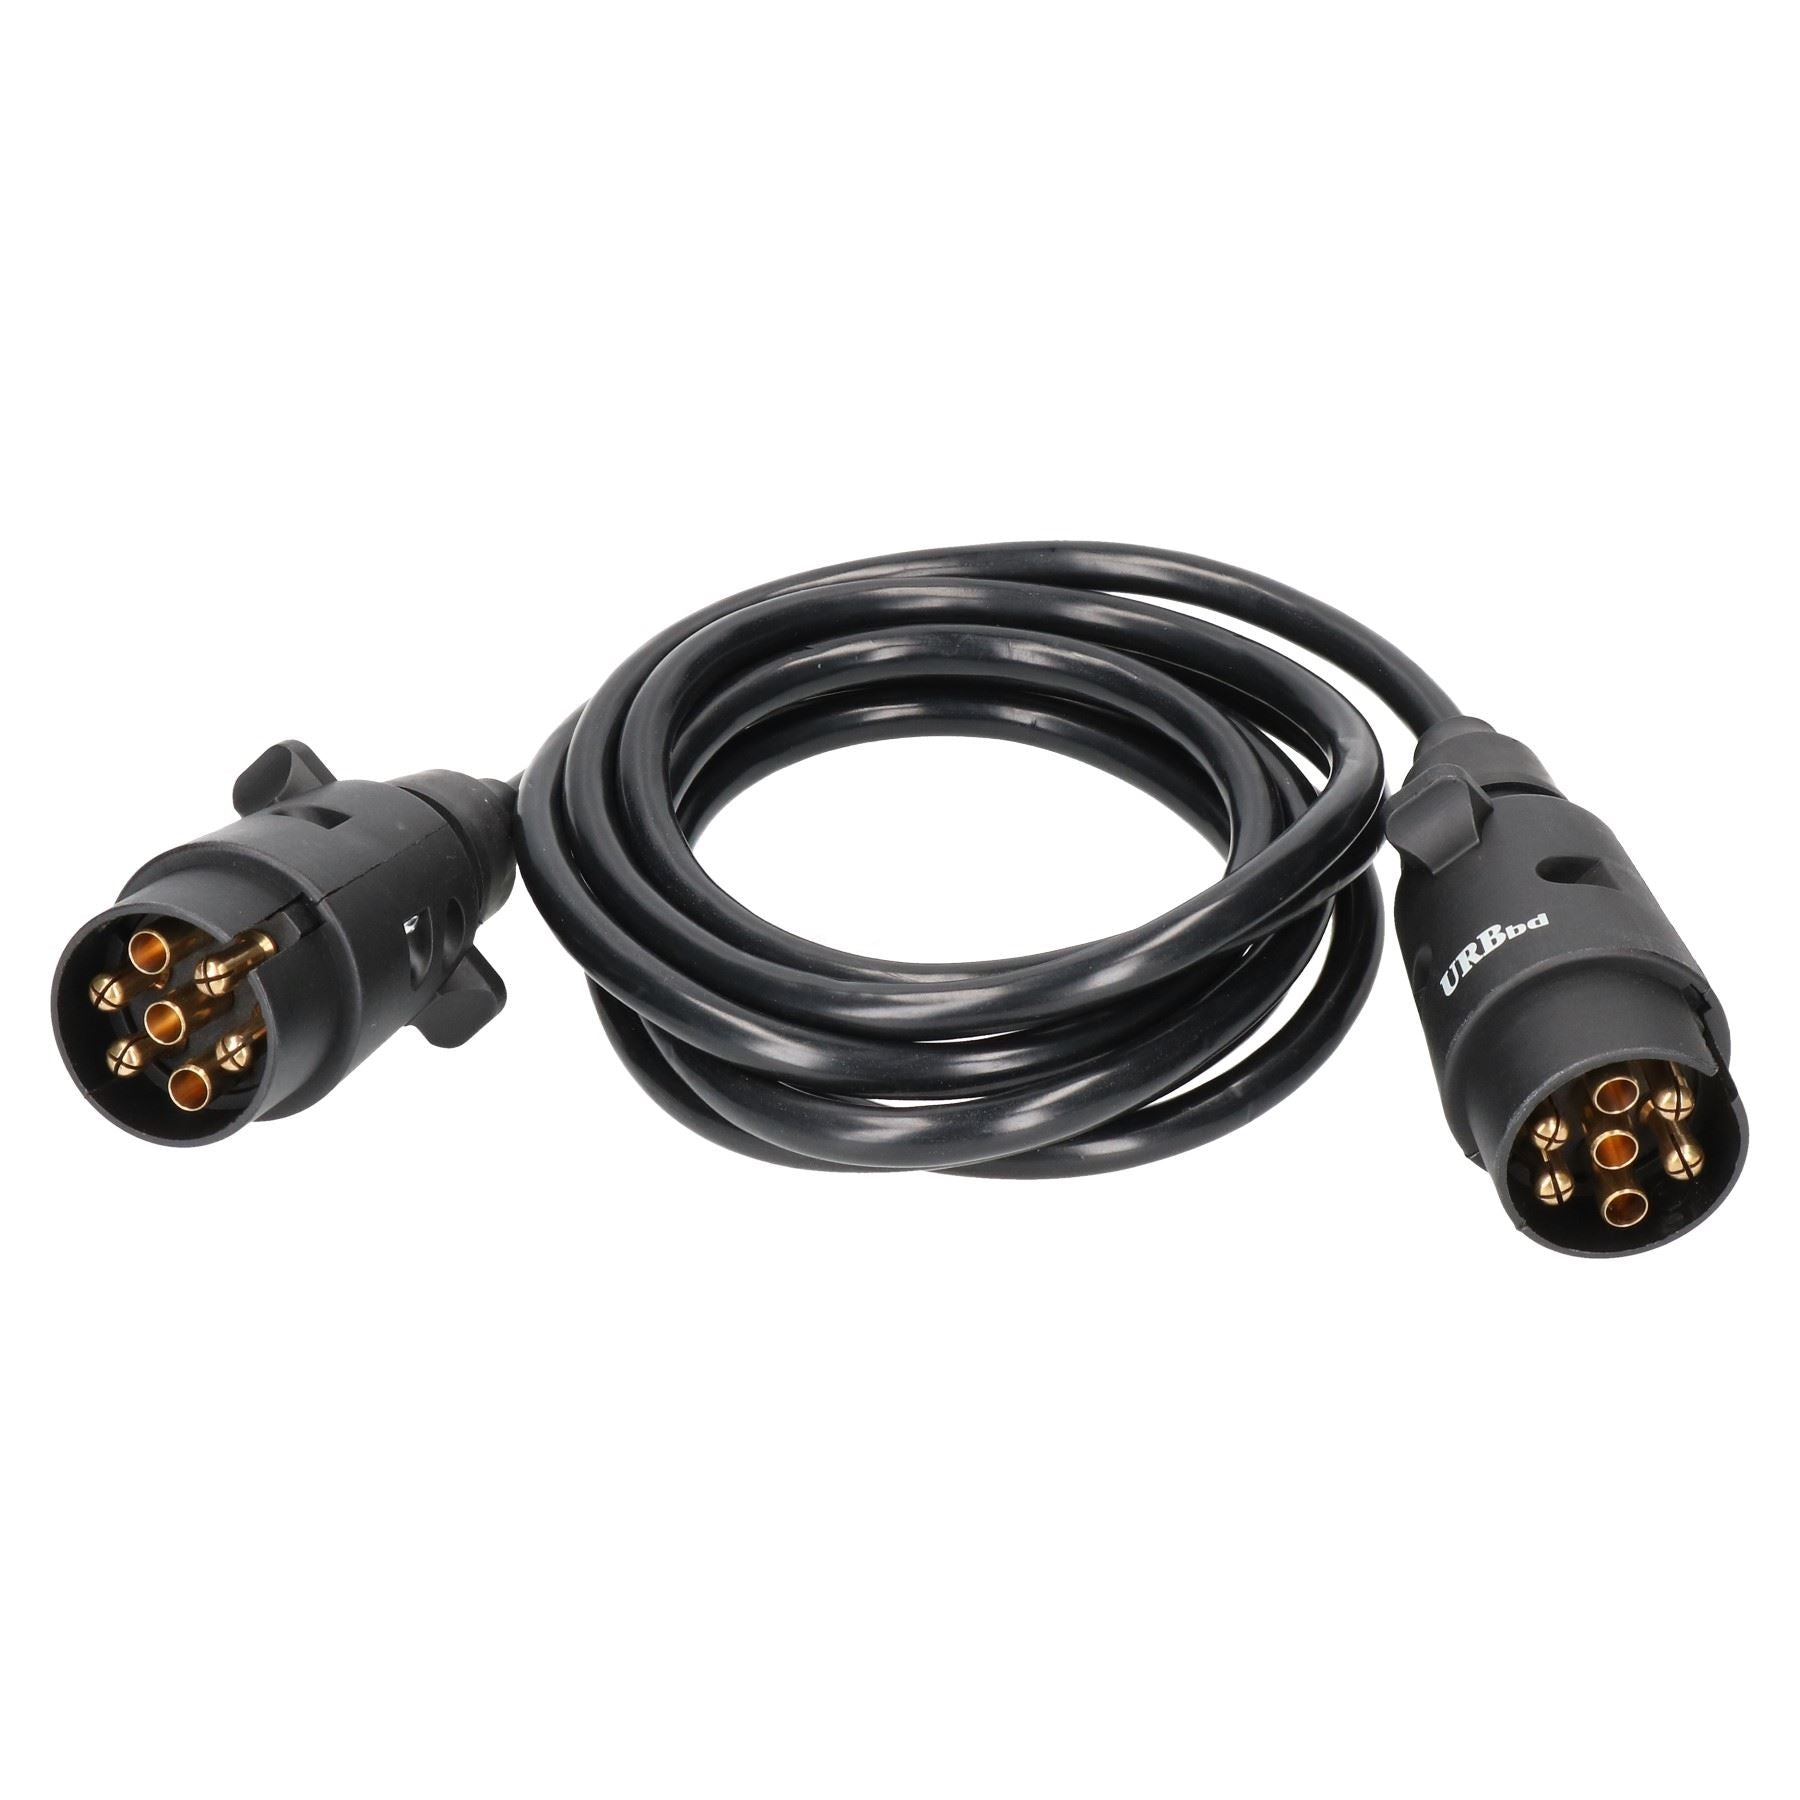 Trailer Light Electrics 3.5m Extension Cable Lead Male to Male 7 Pin Plugs